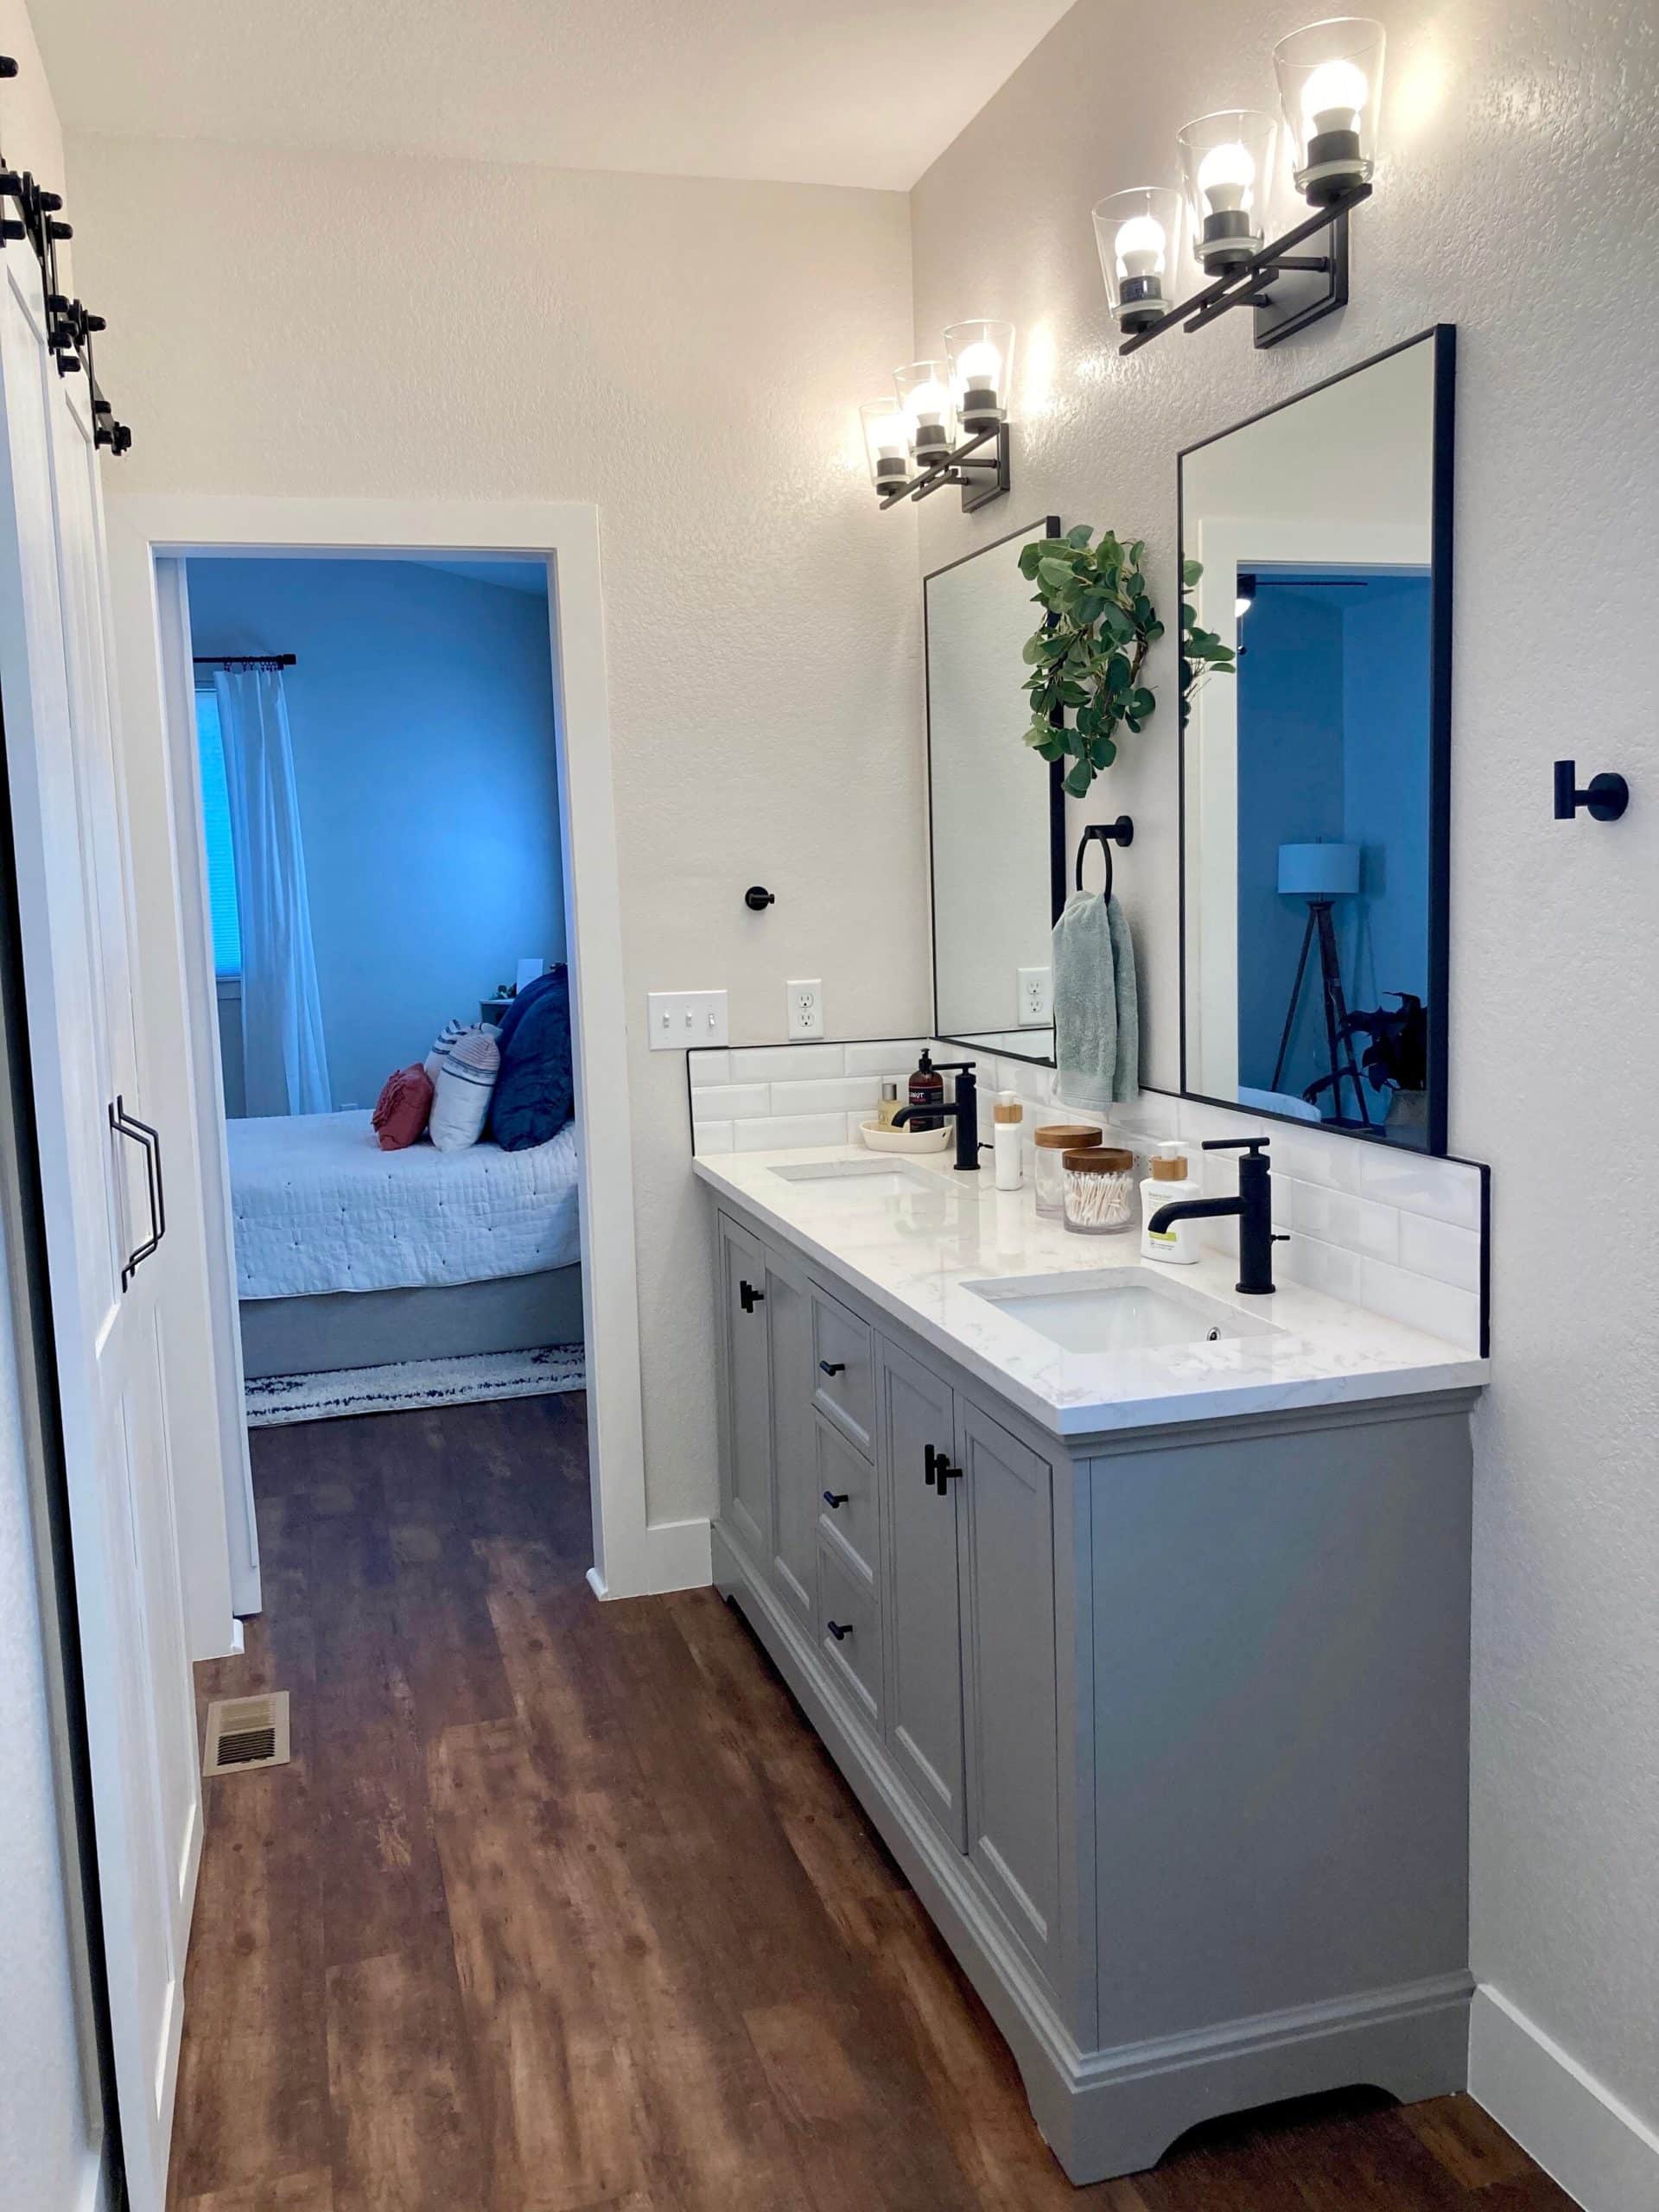 Double bathroom vanity with gray cabinets and white counter top